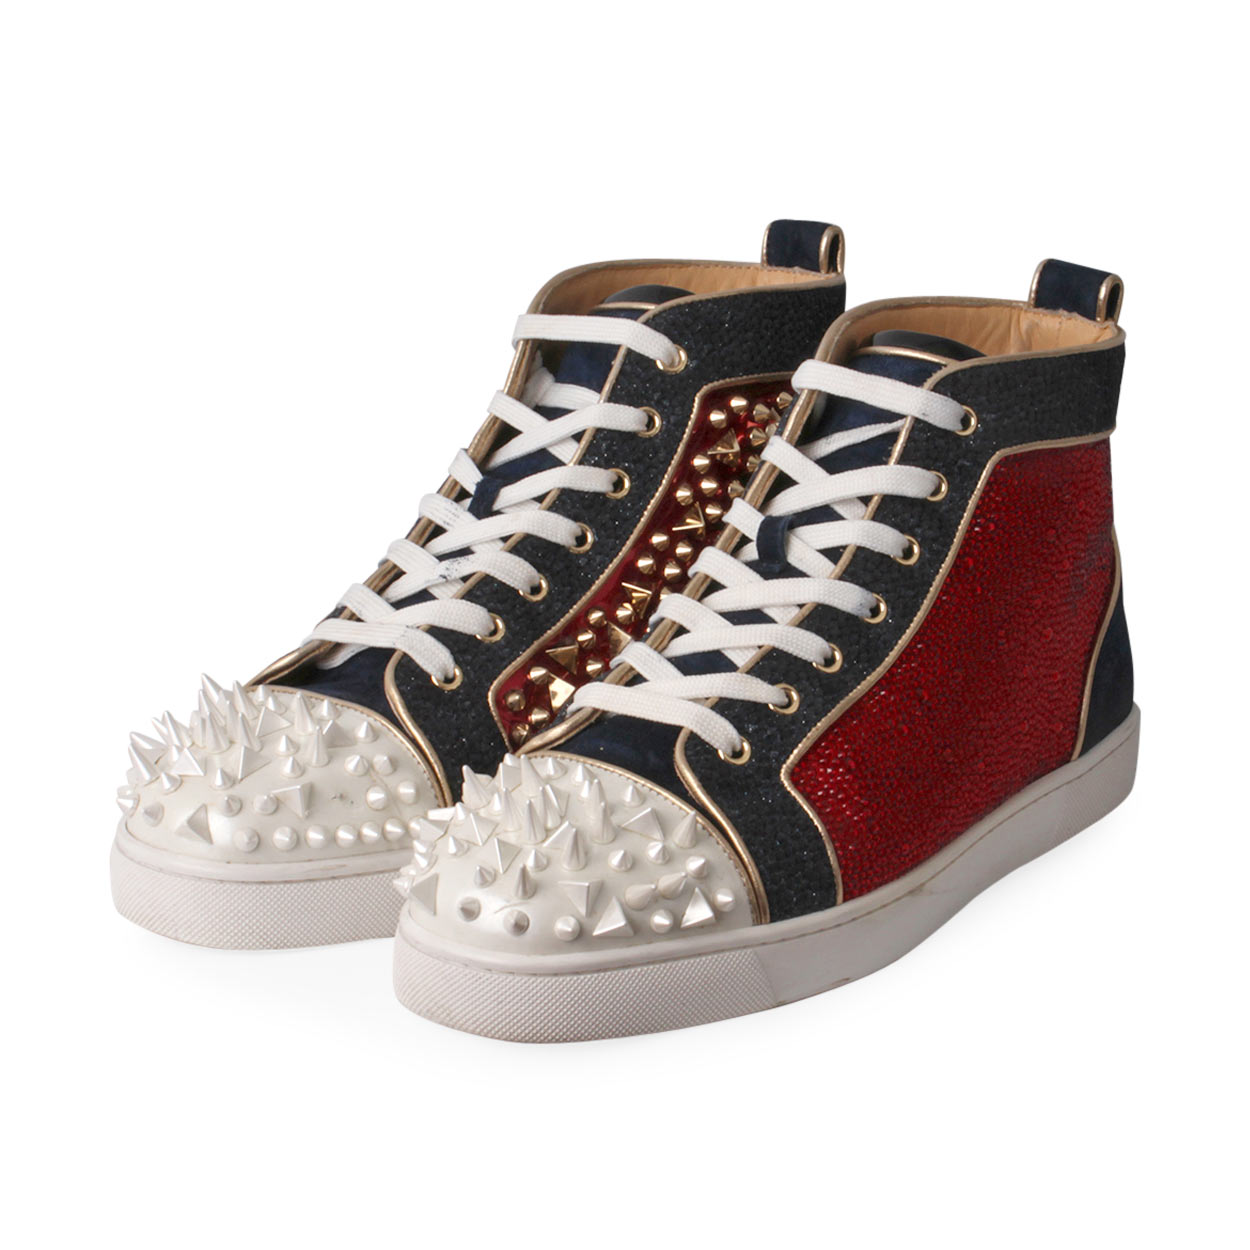 CHRISTIAN LOUBOUTIN Glitter Spikes High-Top Sneakers Navy/Red - S: 44 ...